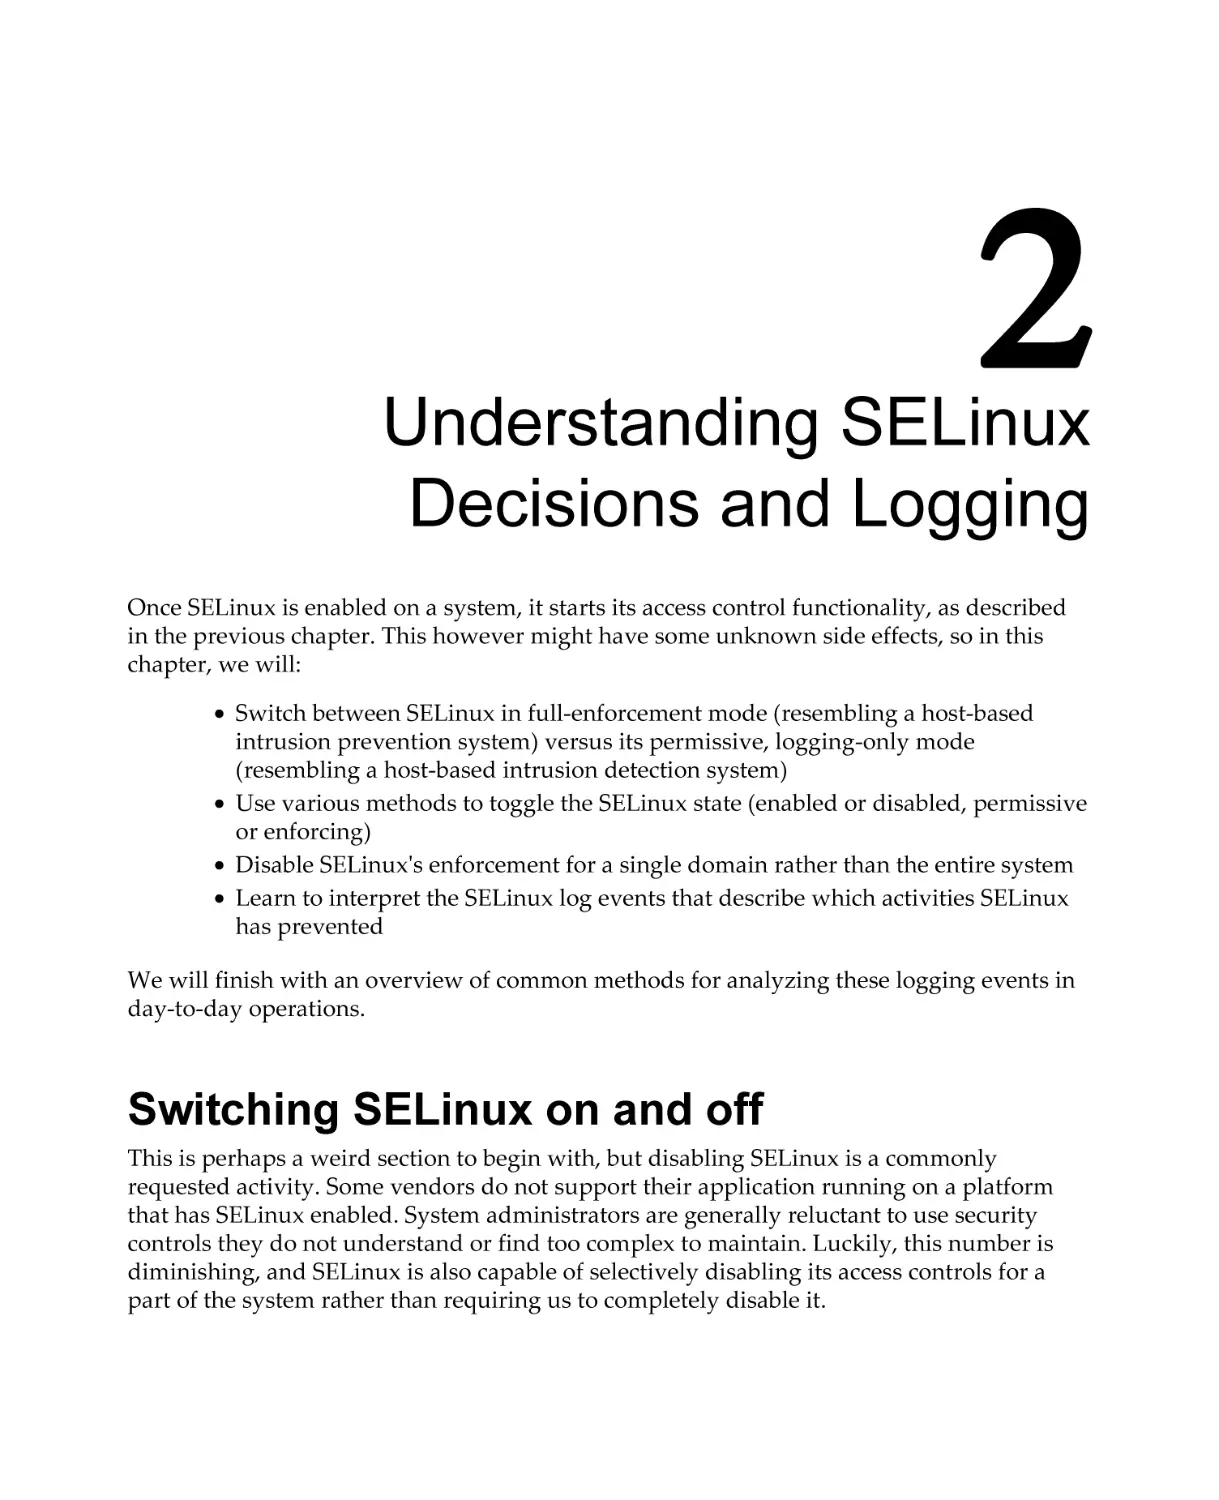 Chapter 2
Switching SELinux on and off